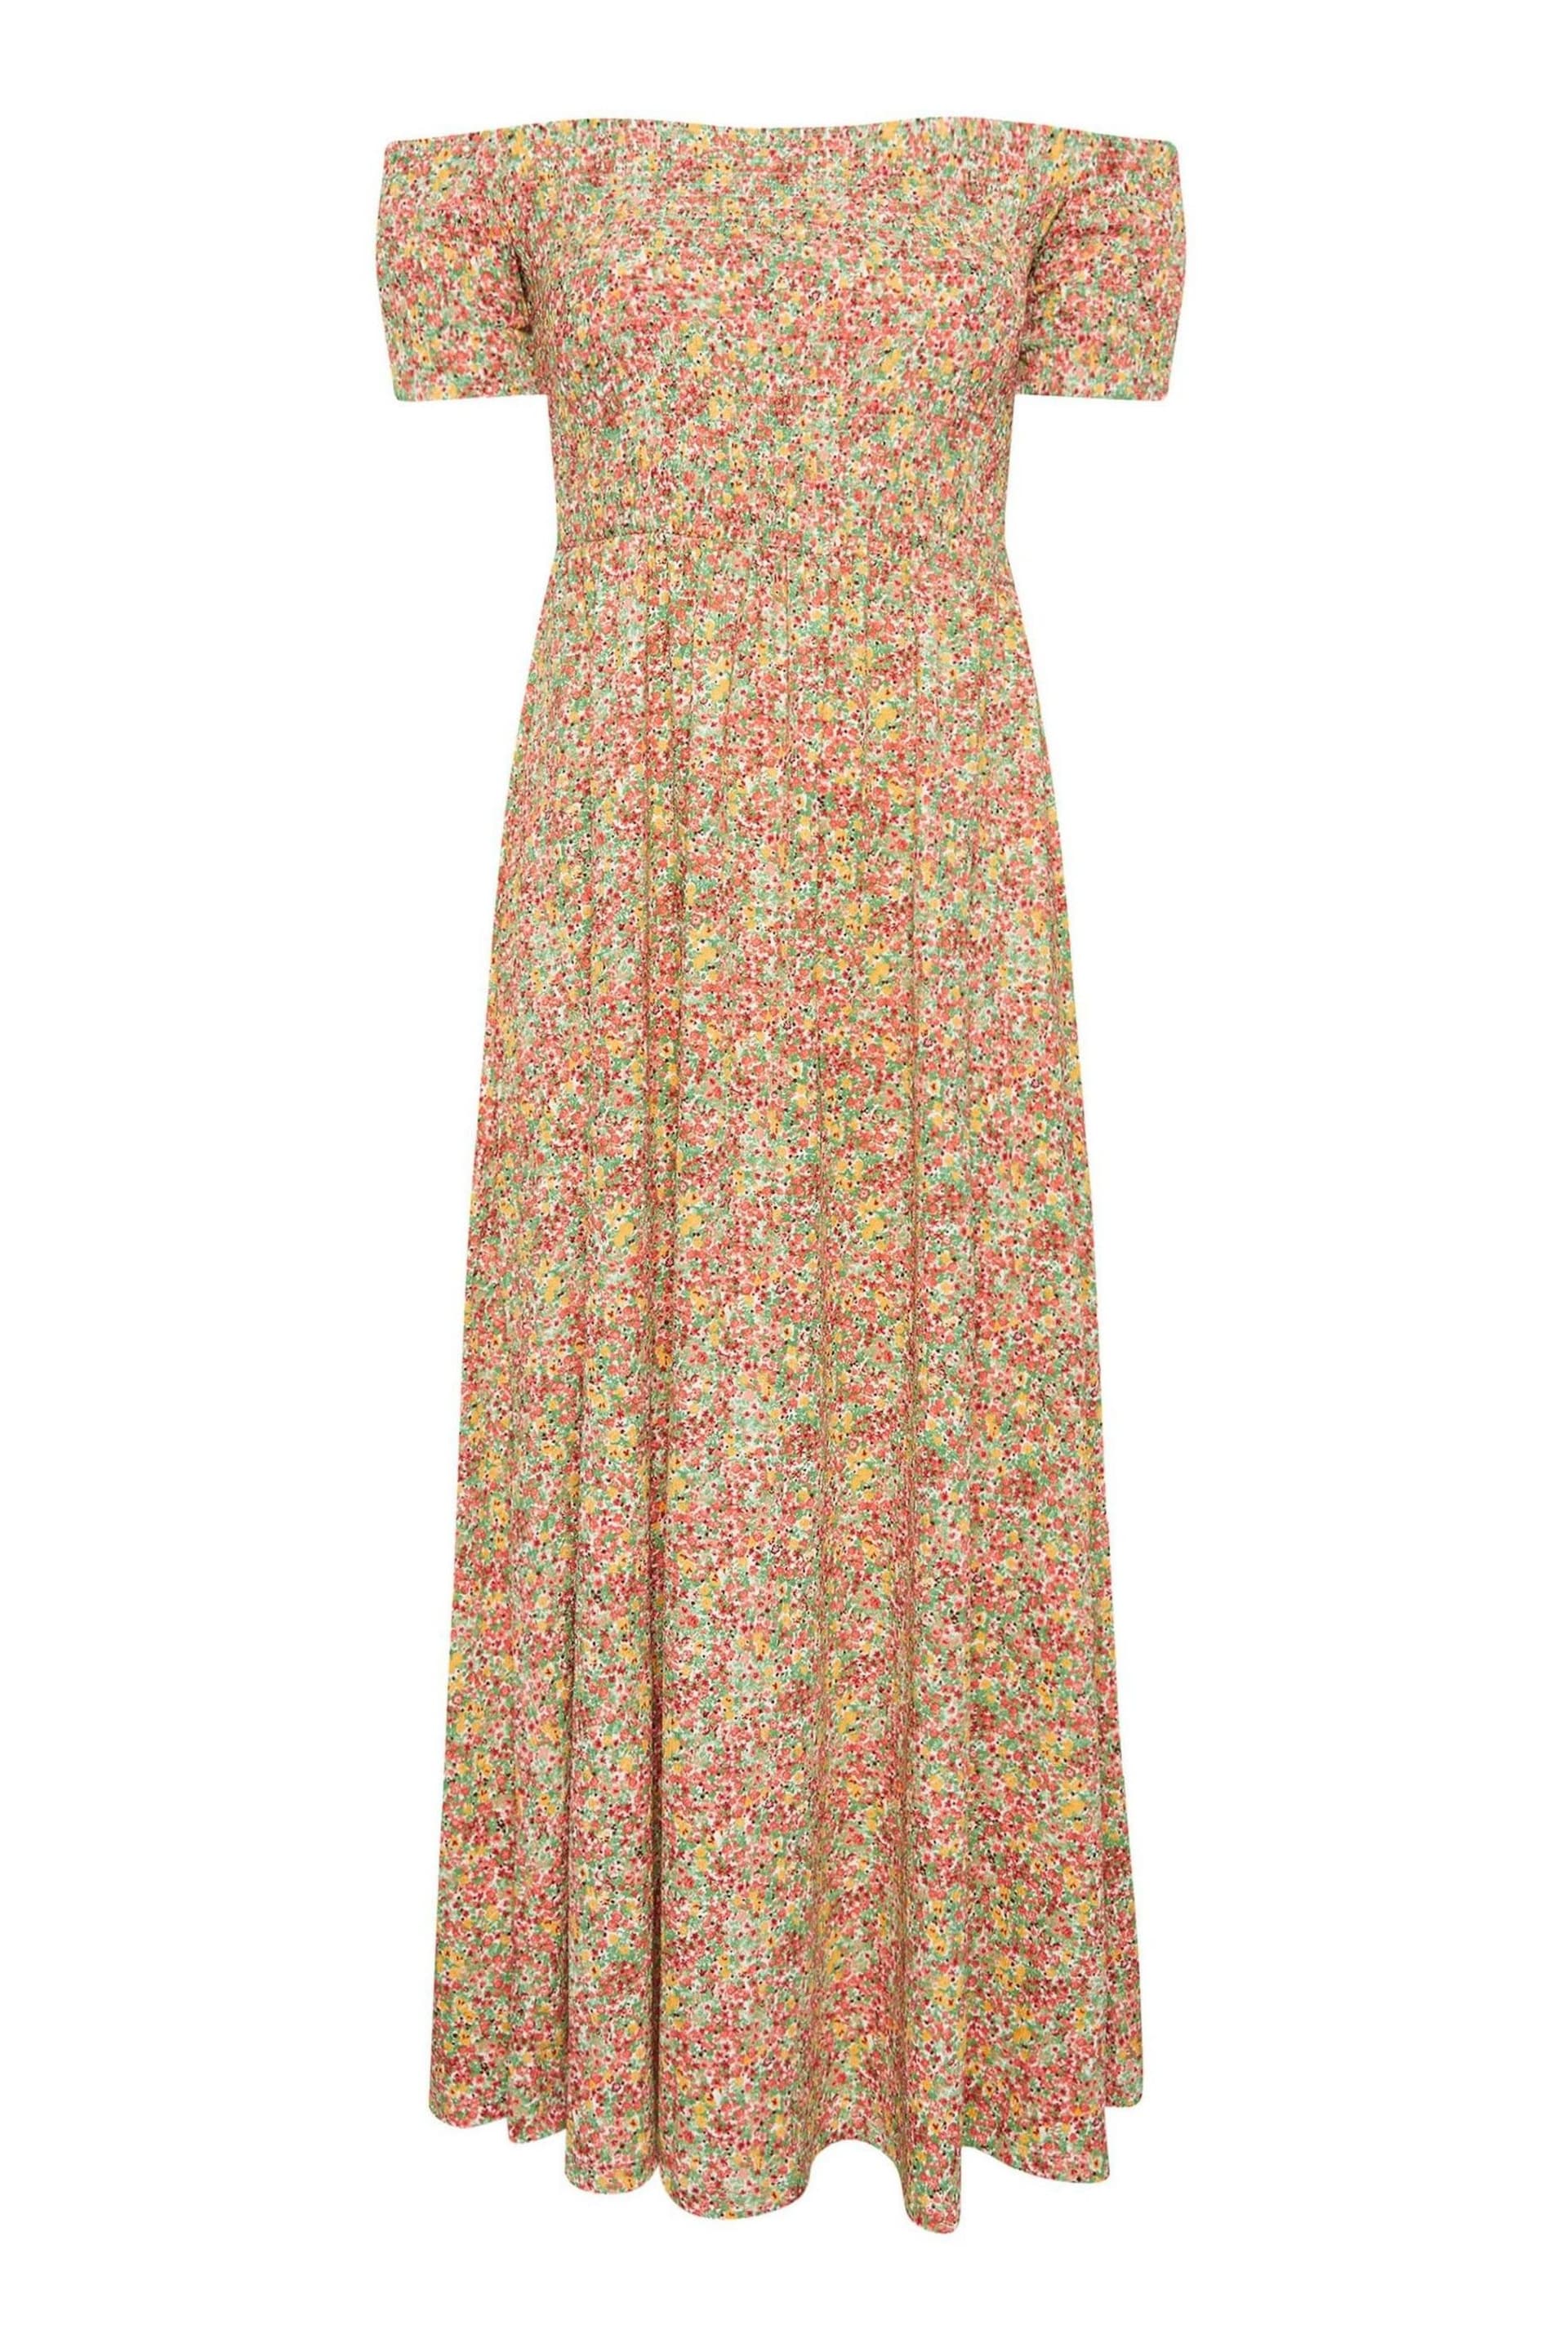 Yours Curve Pink Ditsy Floral Shirred Midaxi Dress - Image 5 of 5